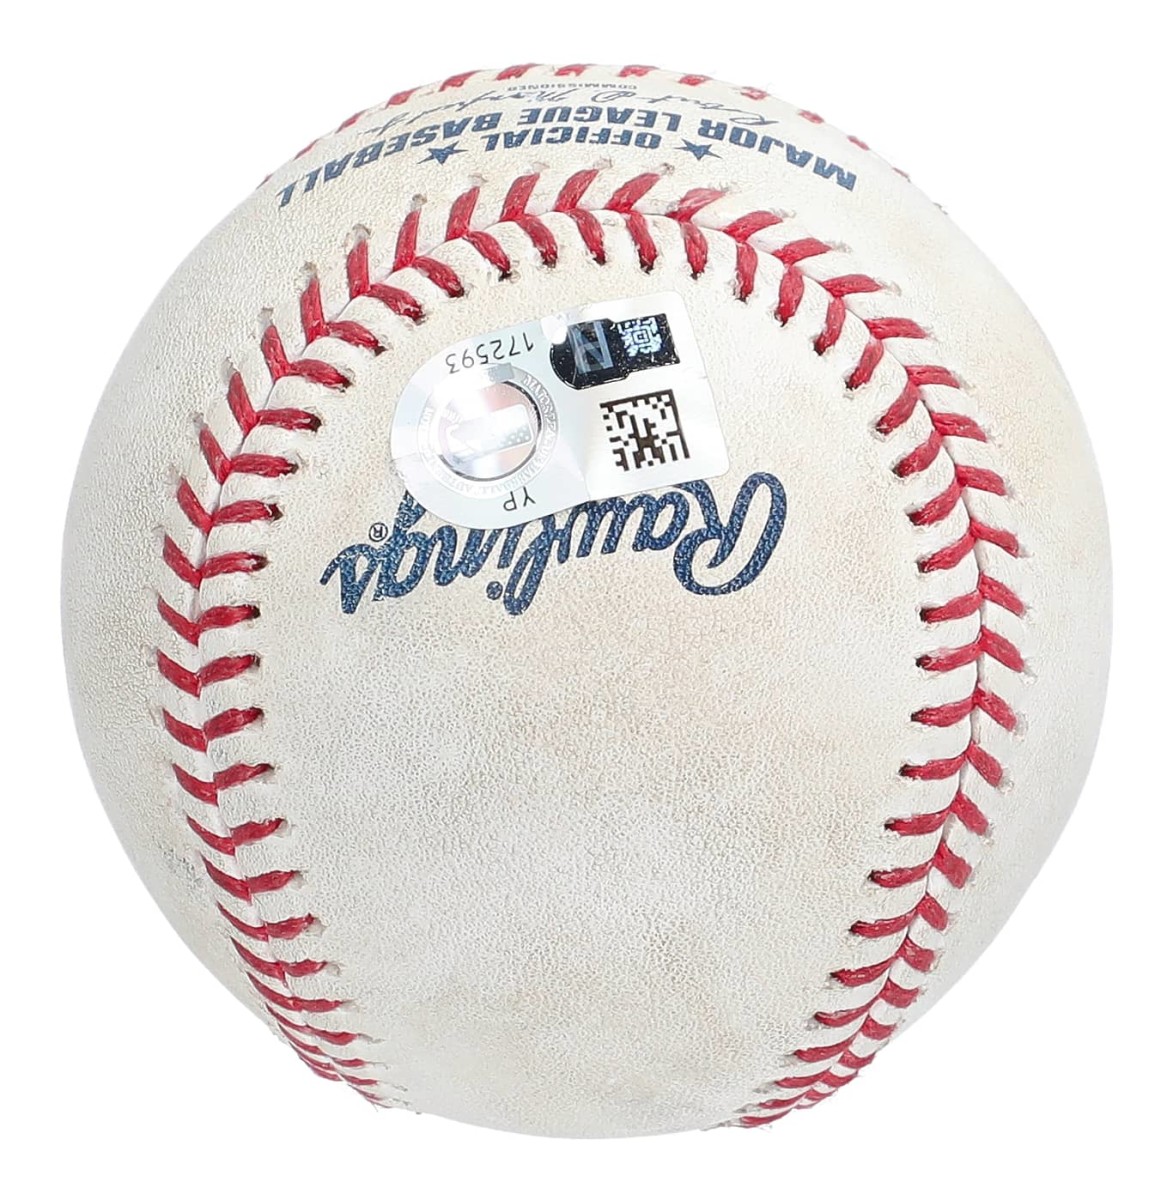 The baseball Albert Pujols hit for his 700th career home run, authenticated by Major League Baseball.